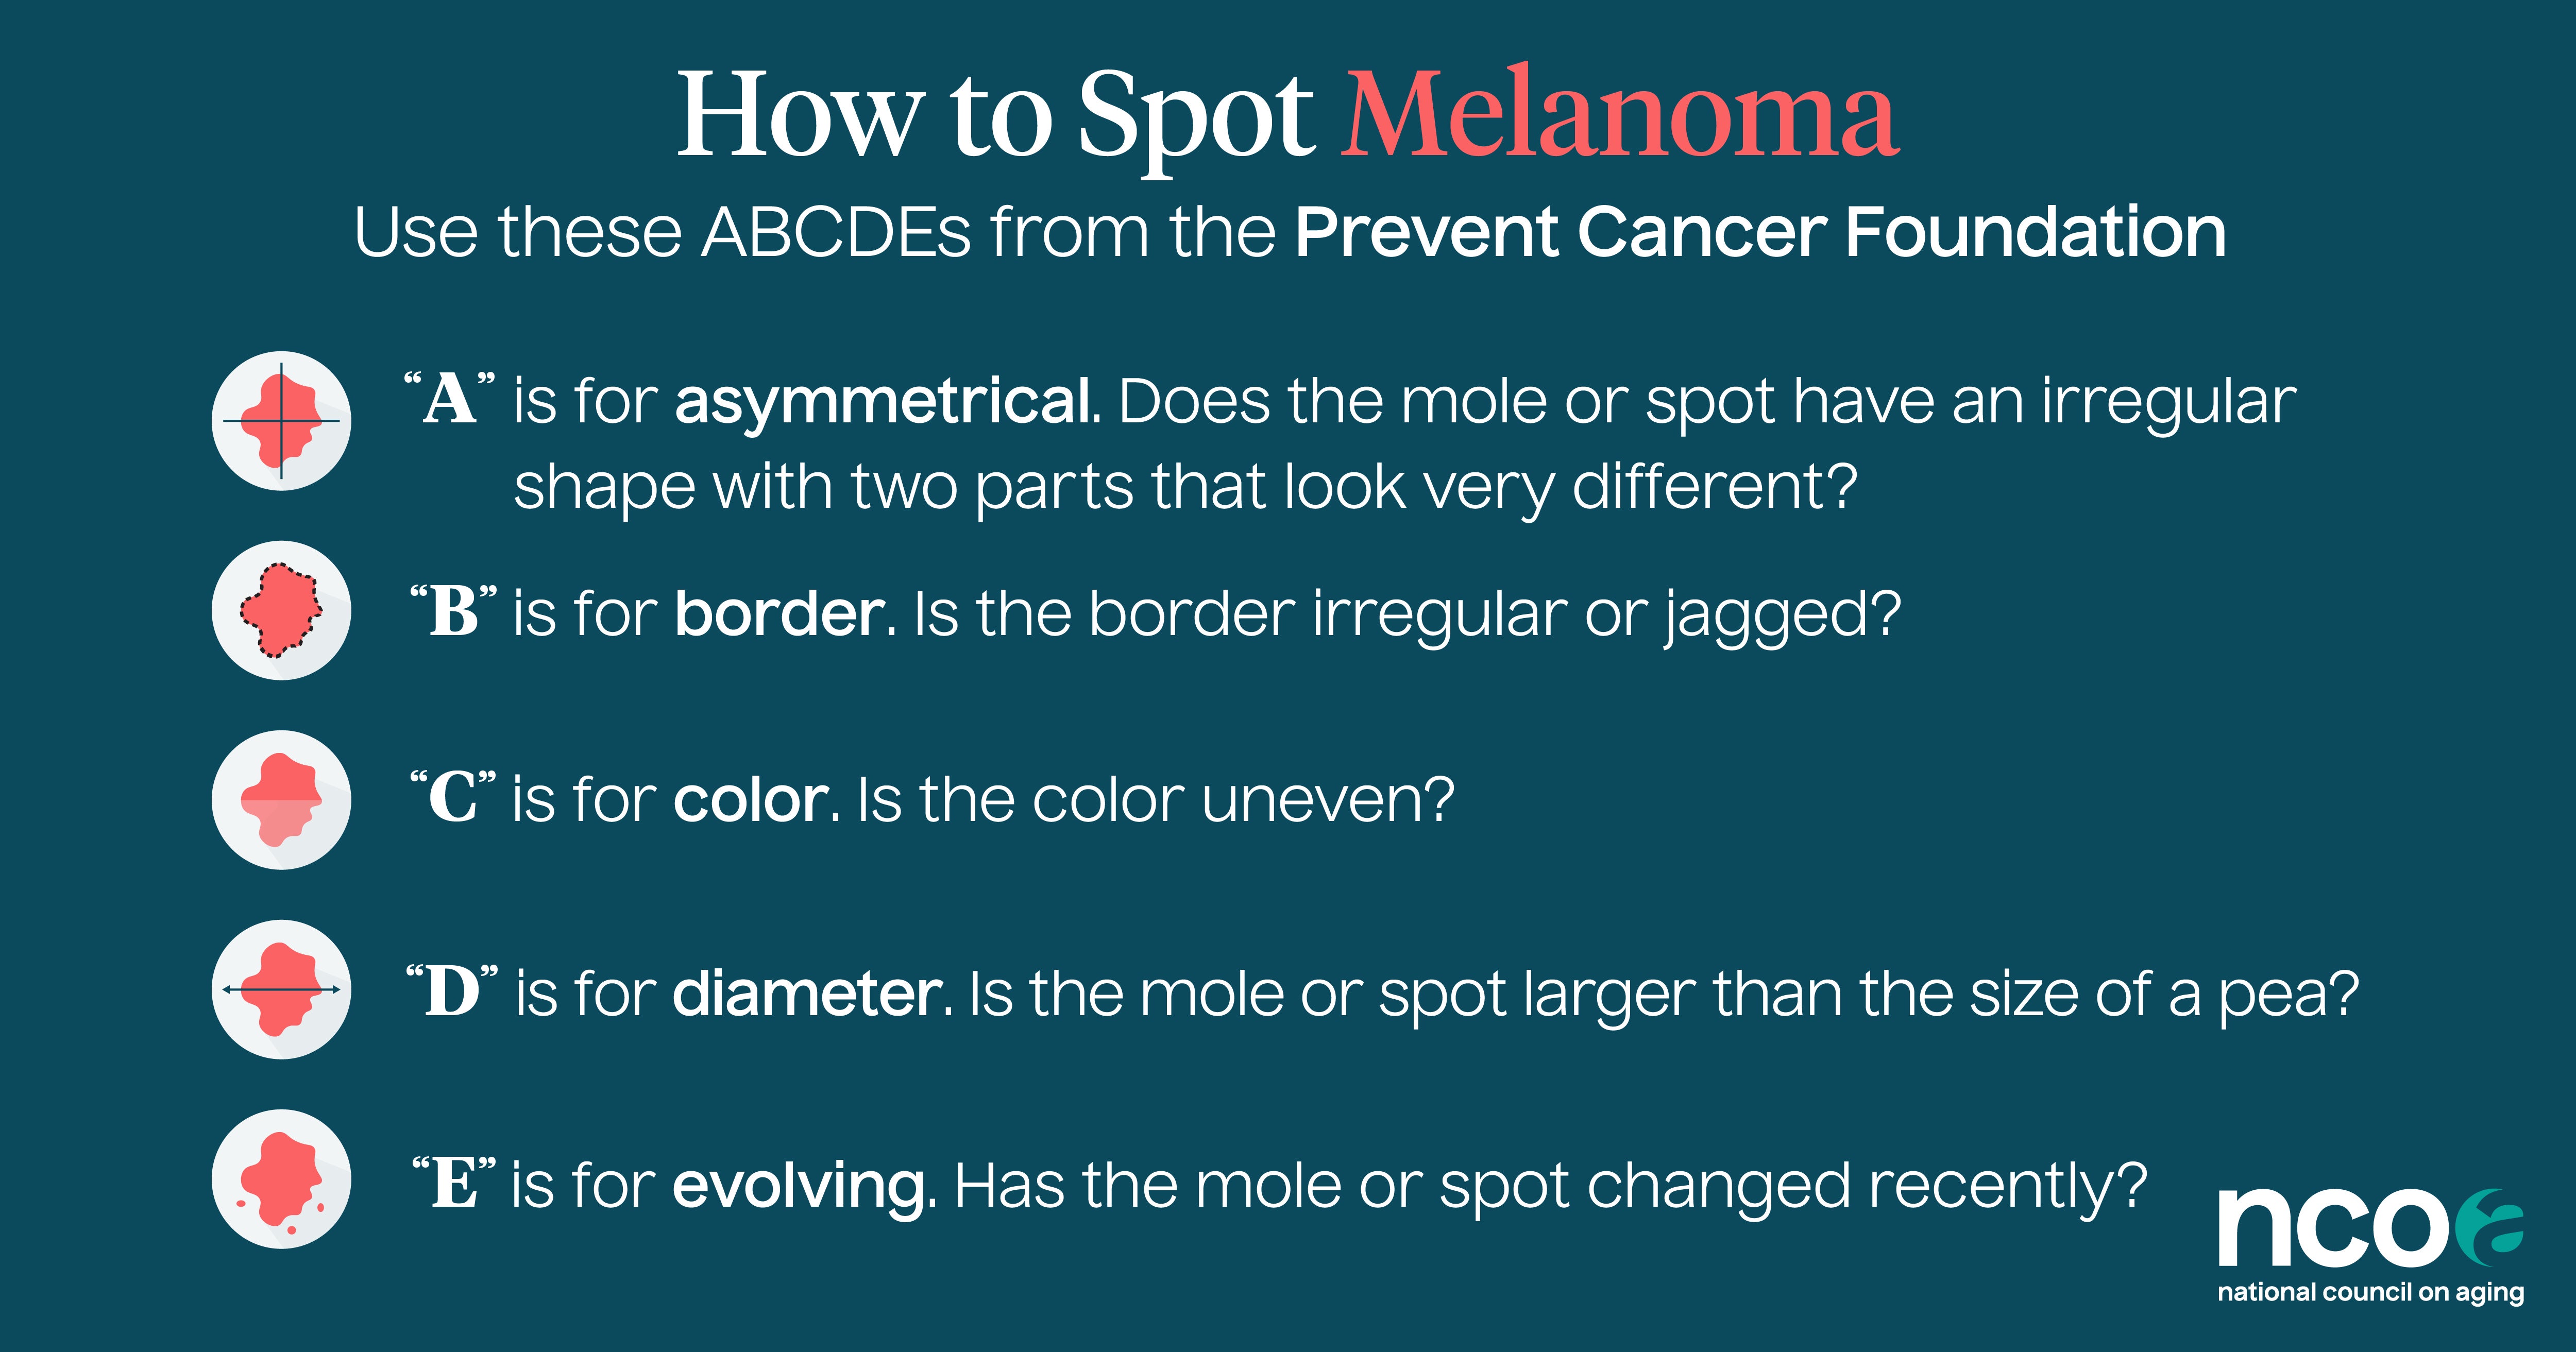 Over 98% of skin cancers can be successfully treated if detected